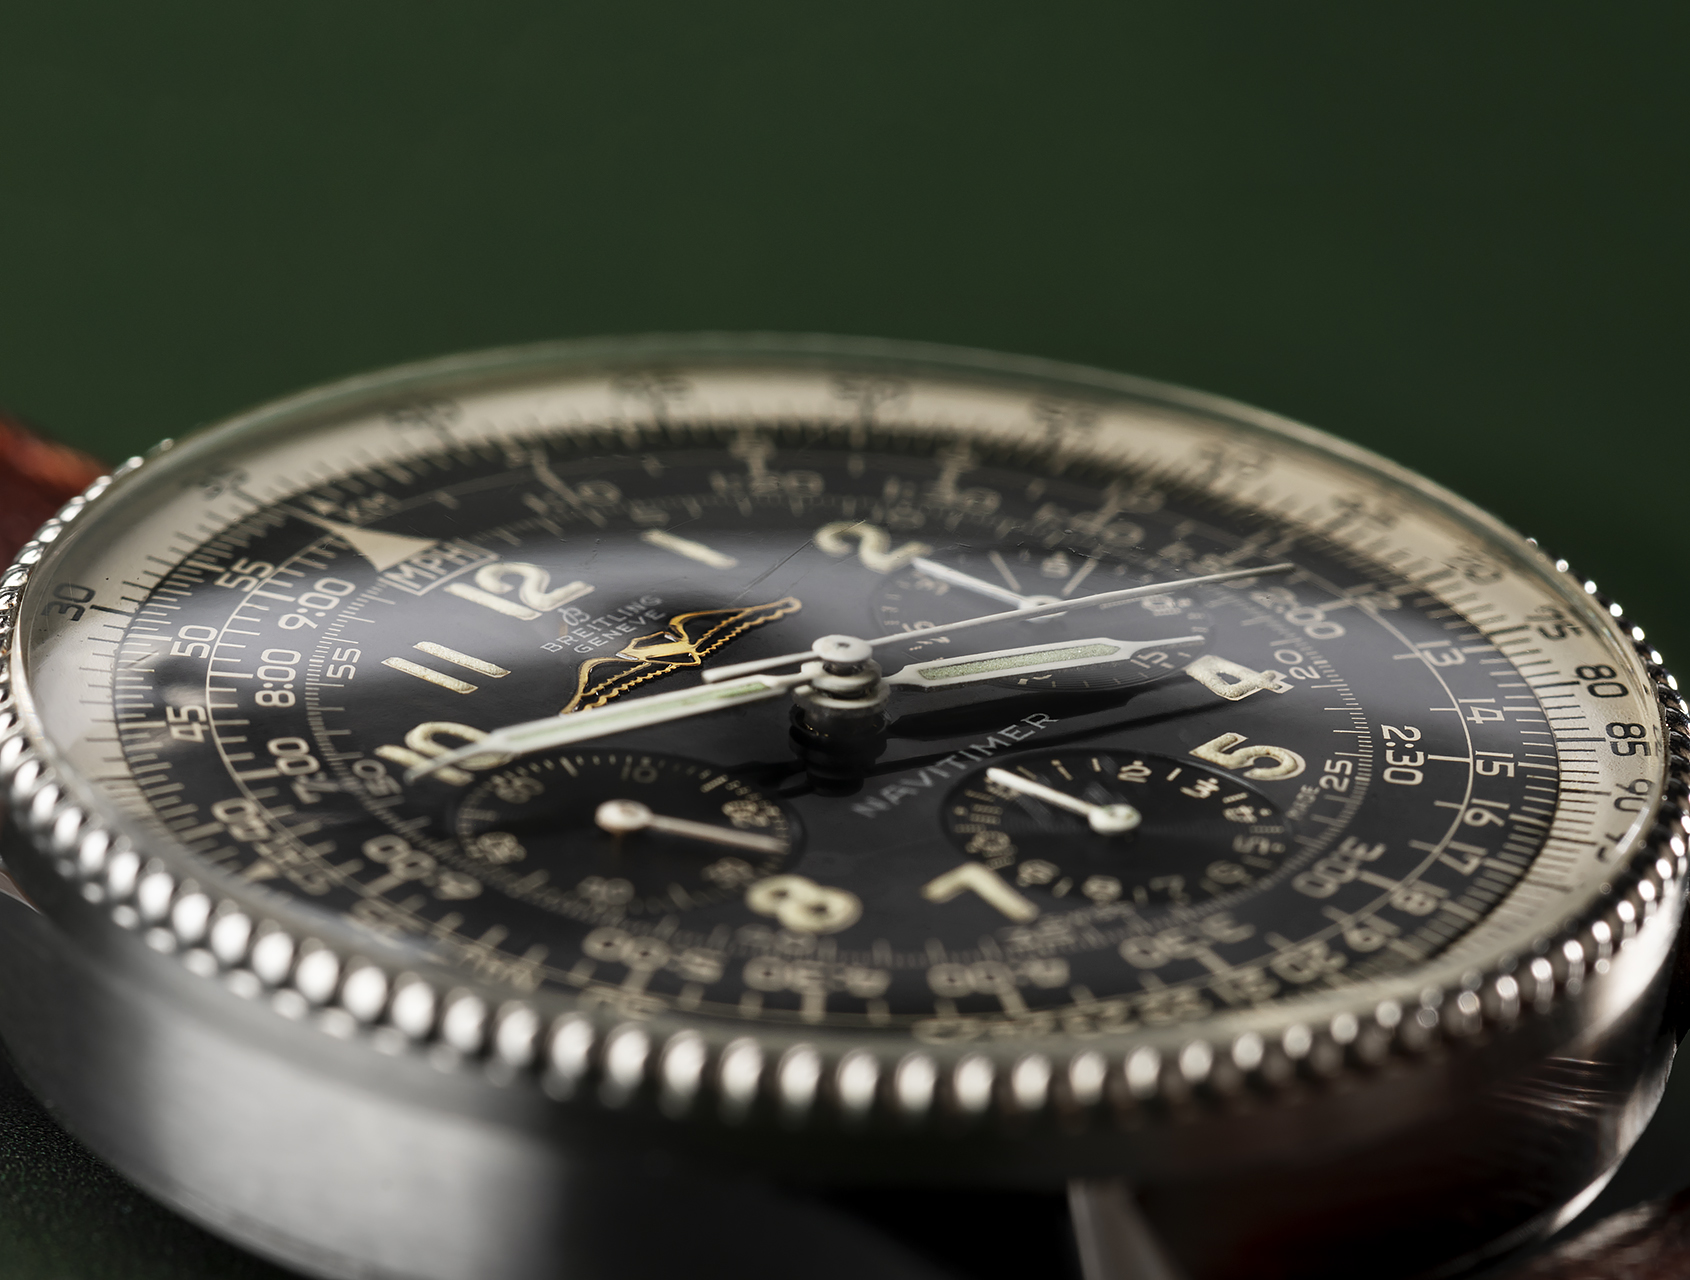 TBT Breitling Navitimer All Black - Hands On with An Icon